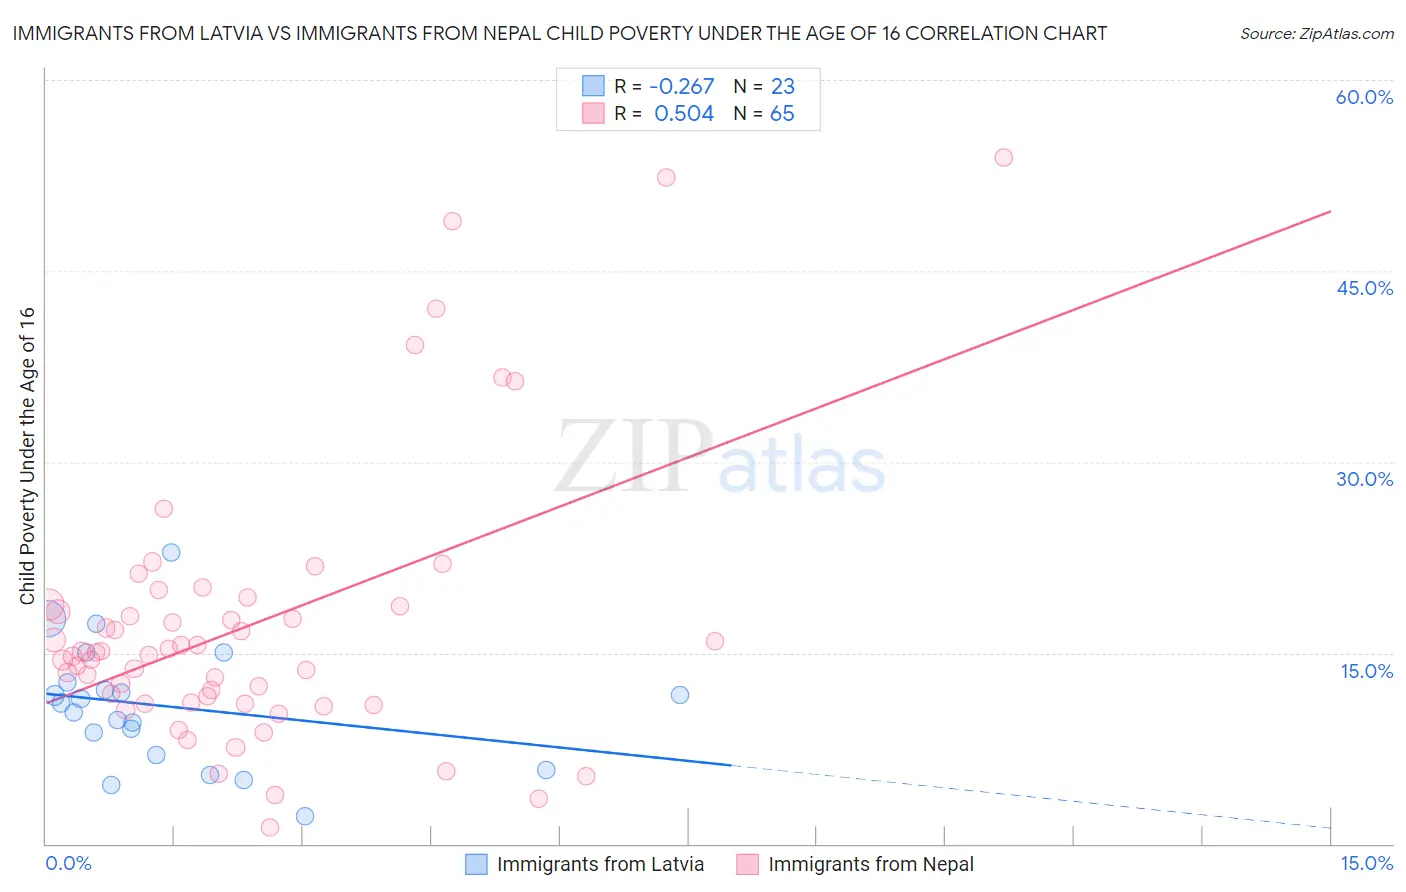 Immigrants from Latvia vs Immigrants from Nepal Child Poverty Under the Age of 16